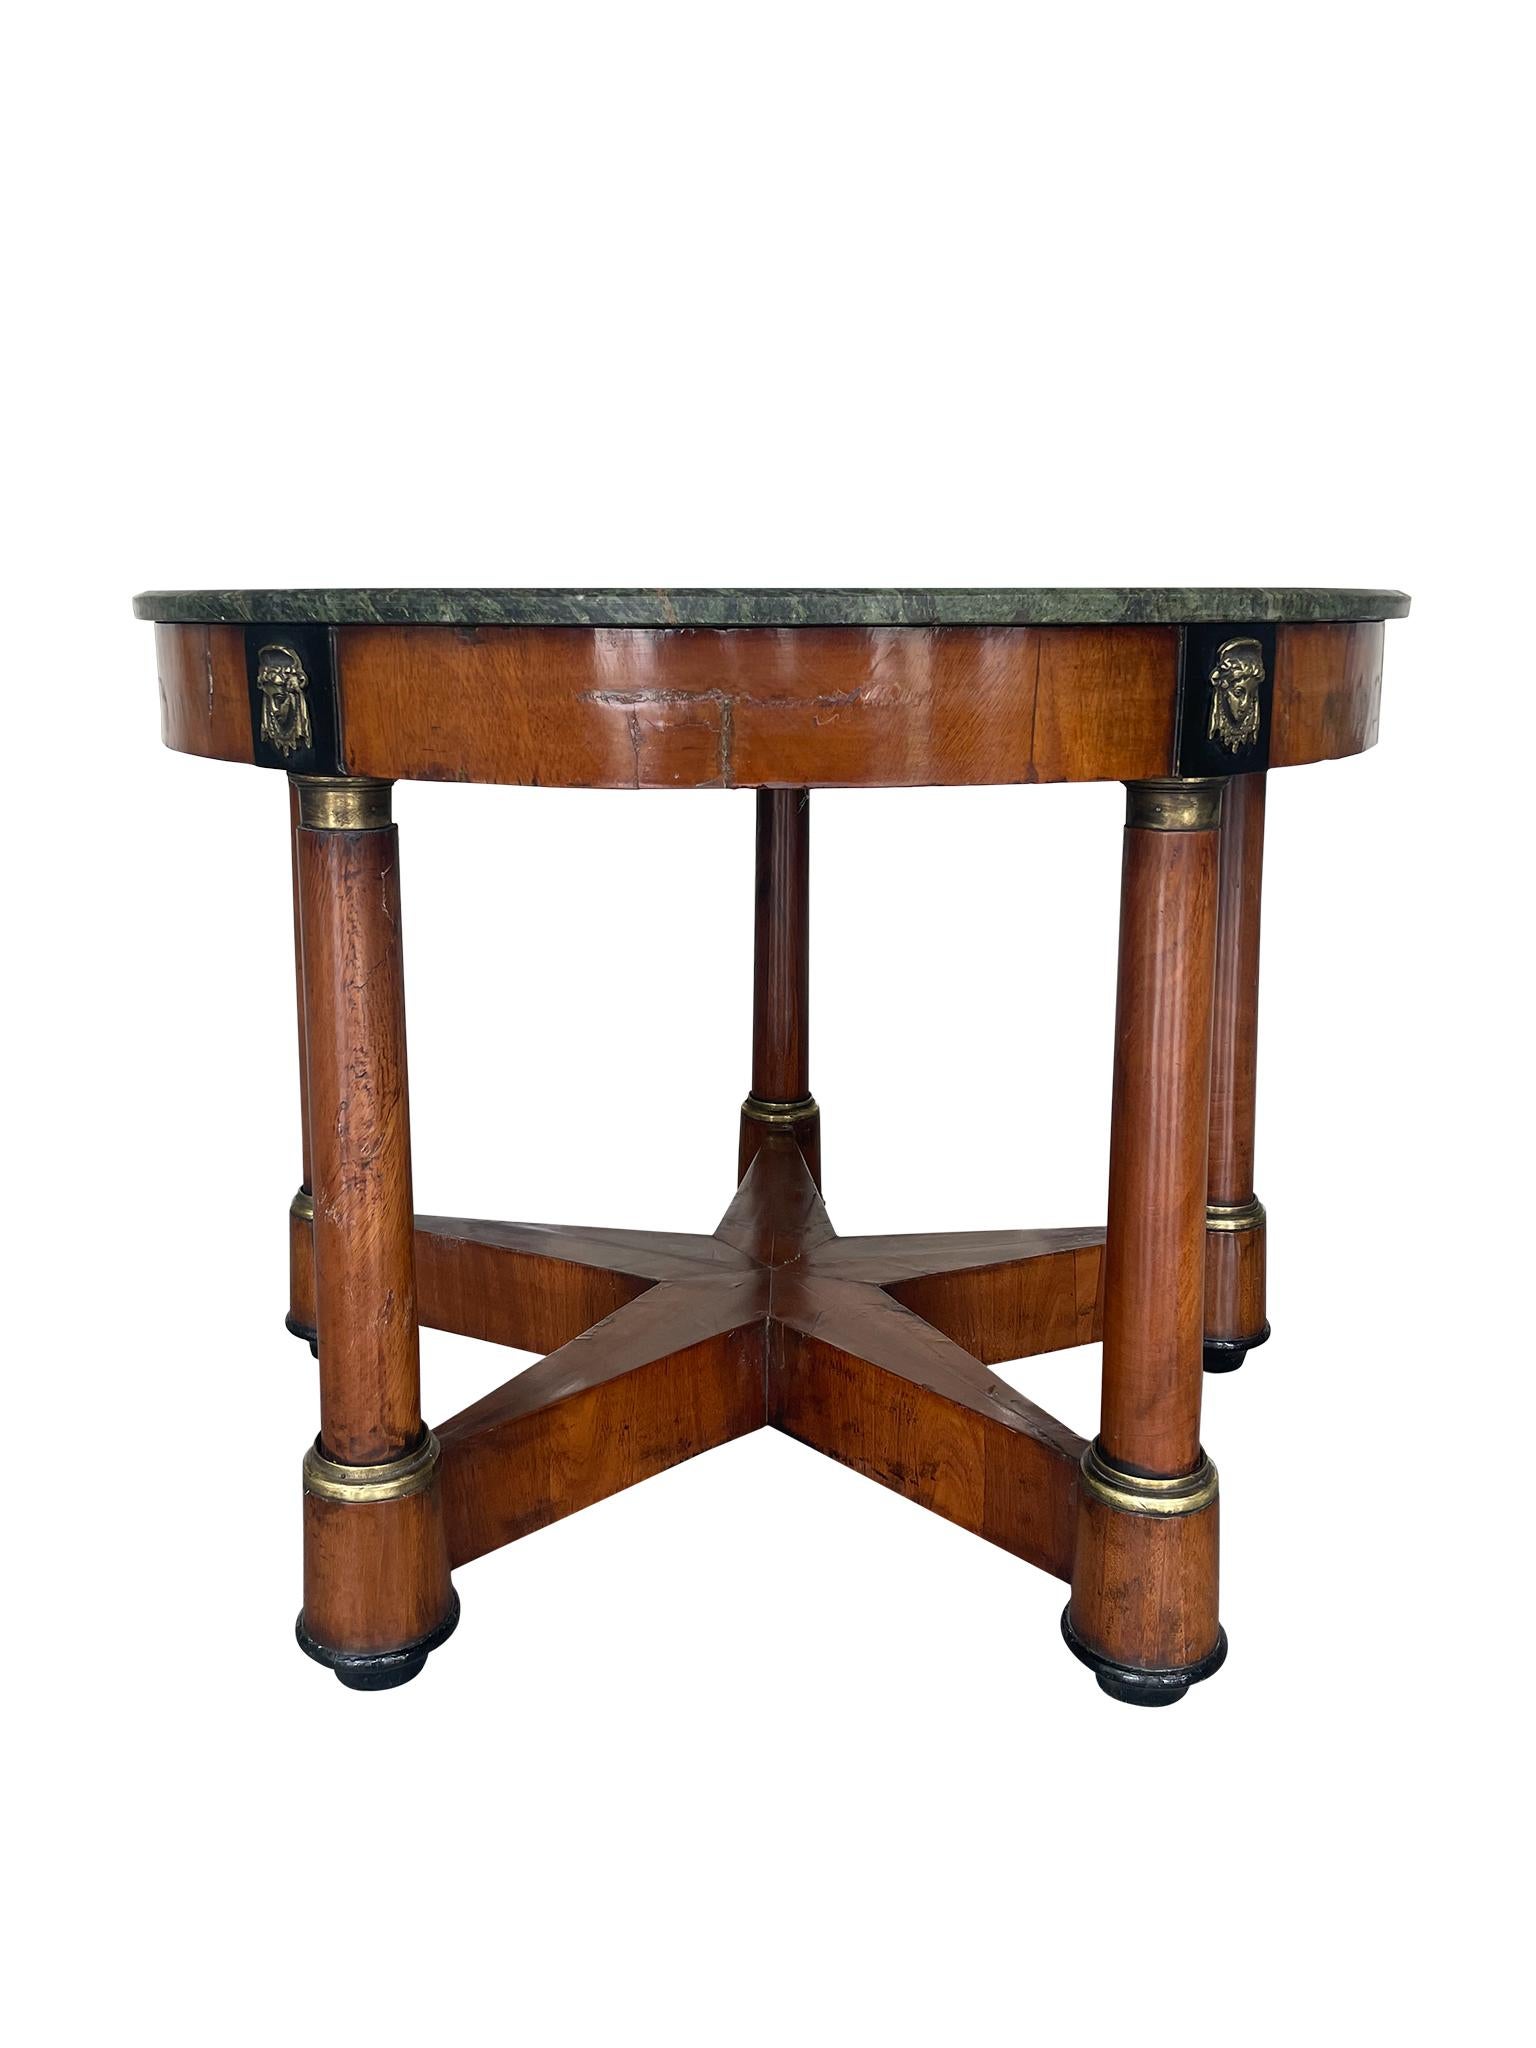 American Antique Empire Style Marbletop Circular Table For Sale